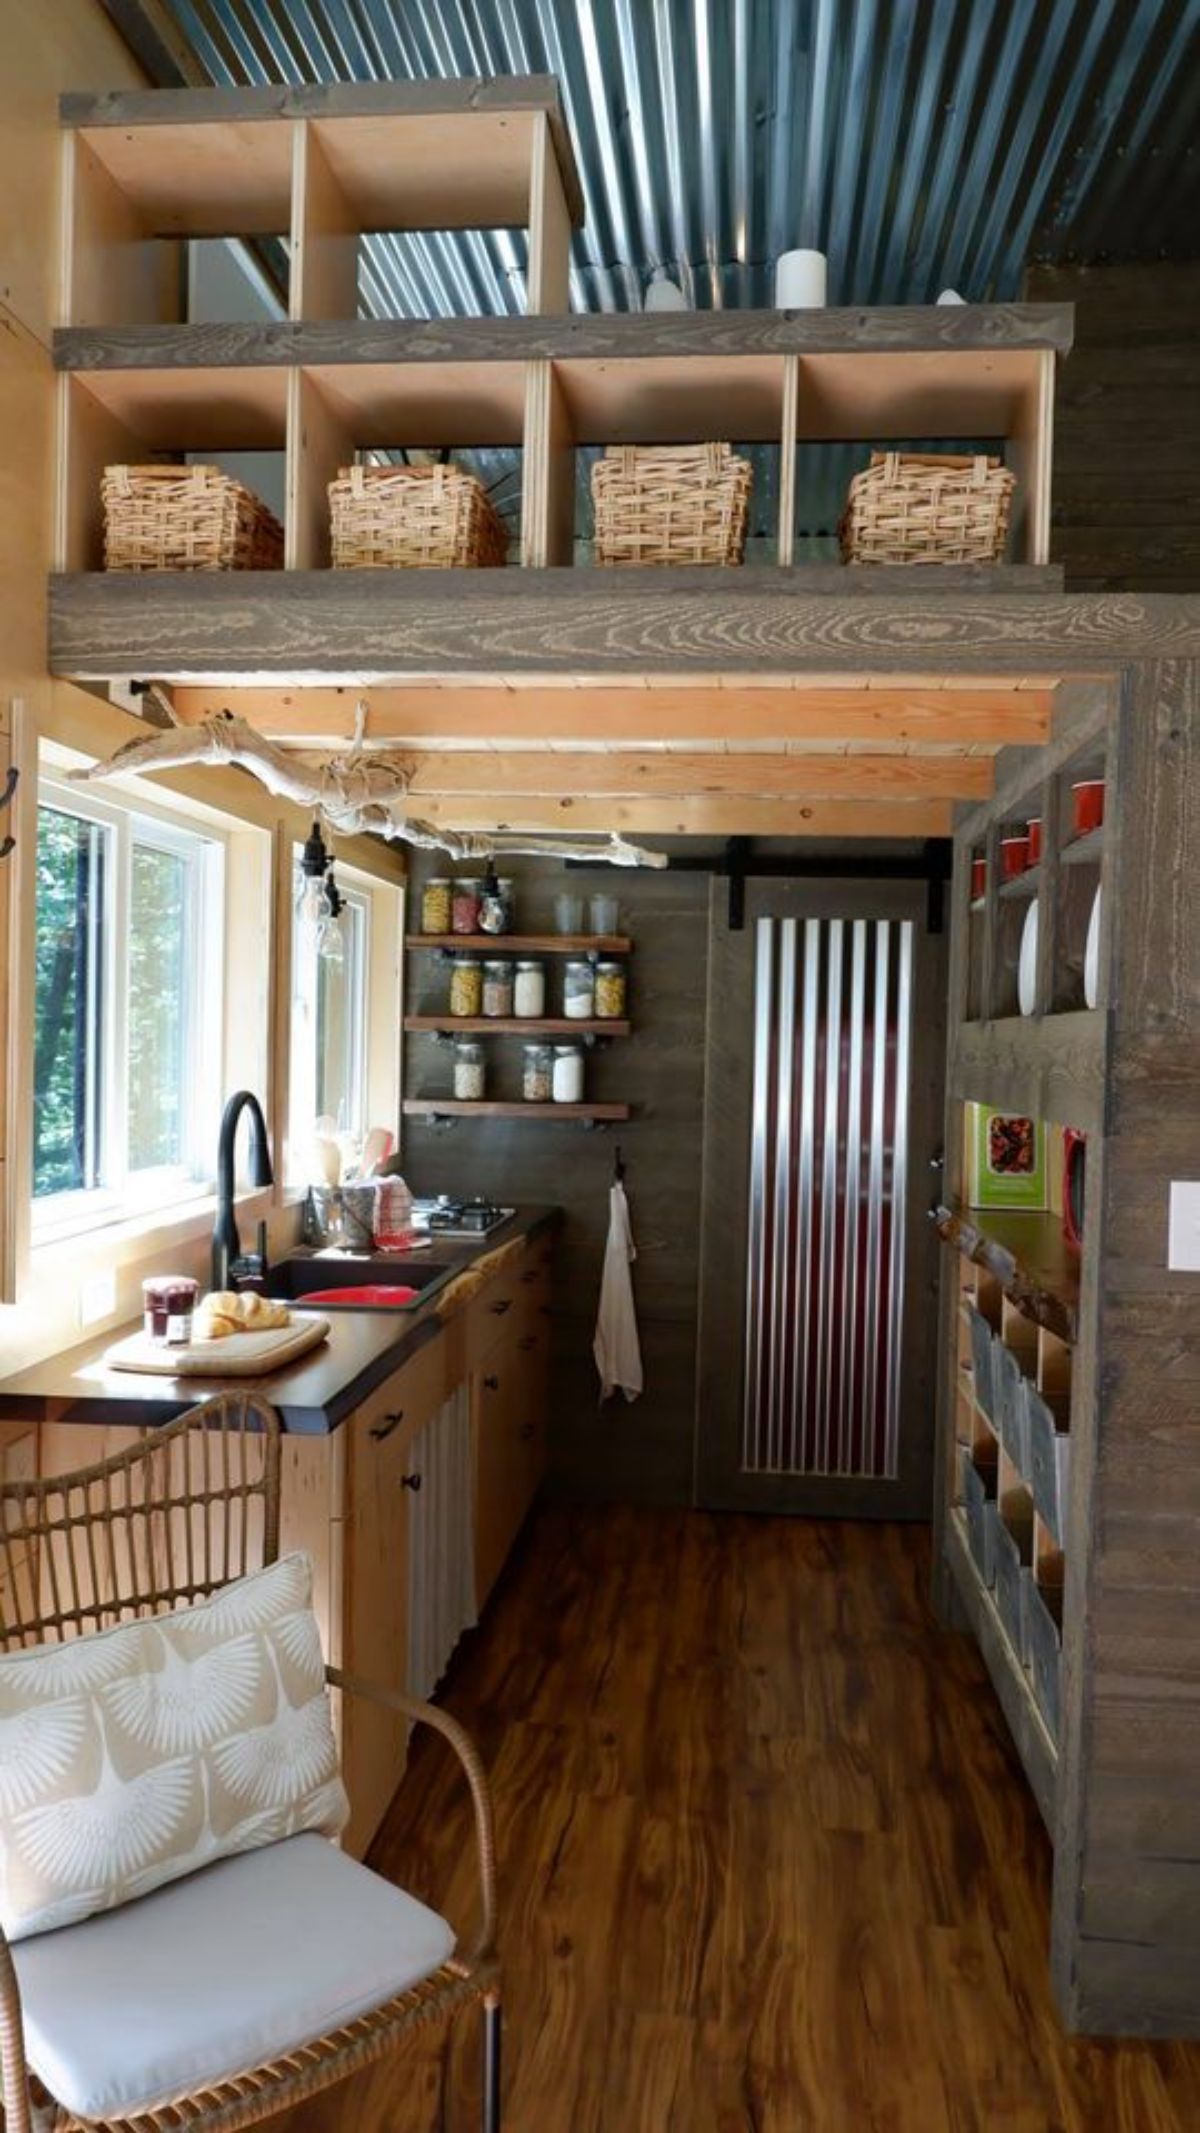 kitchen of tiny home with corrugated metal door at back and wall of storage on right